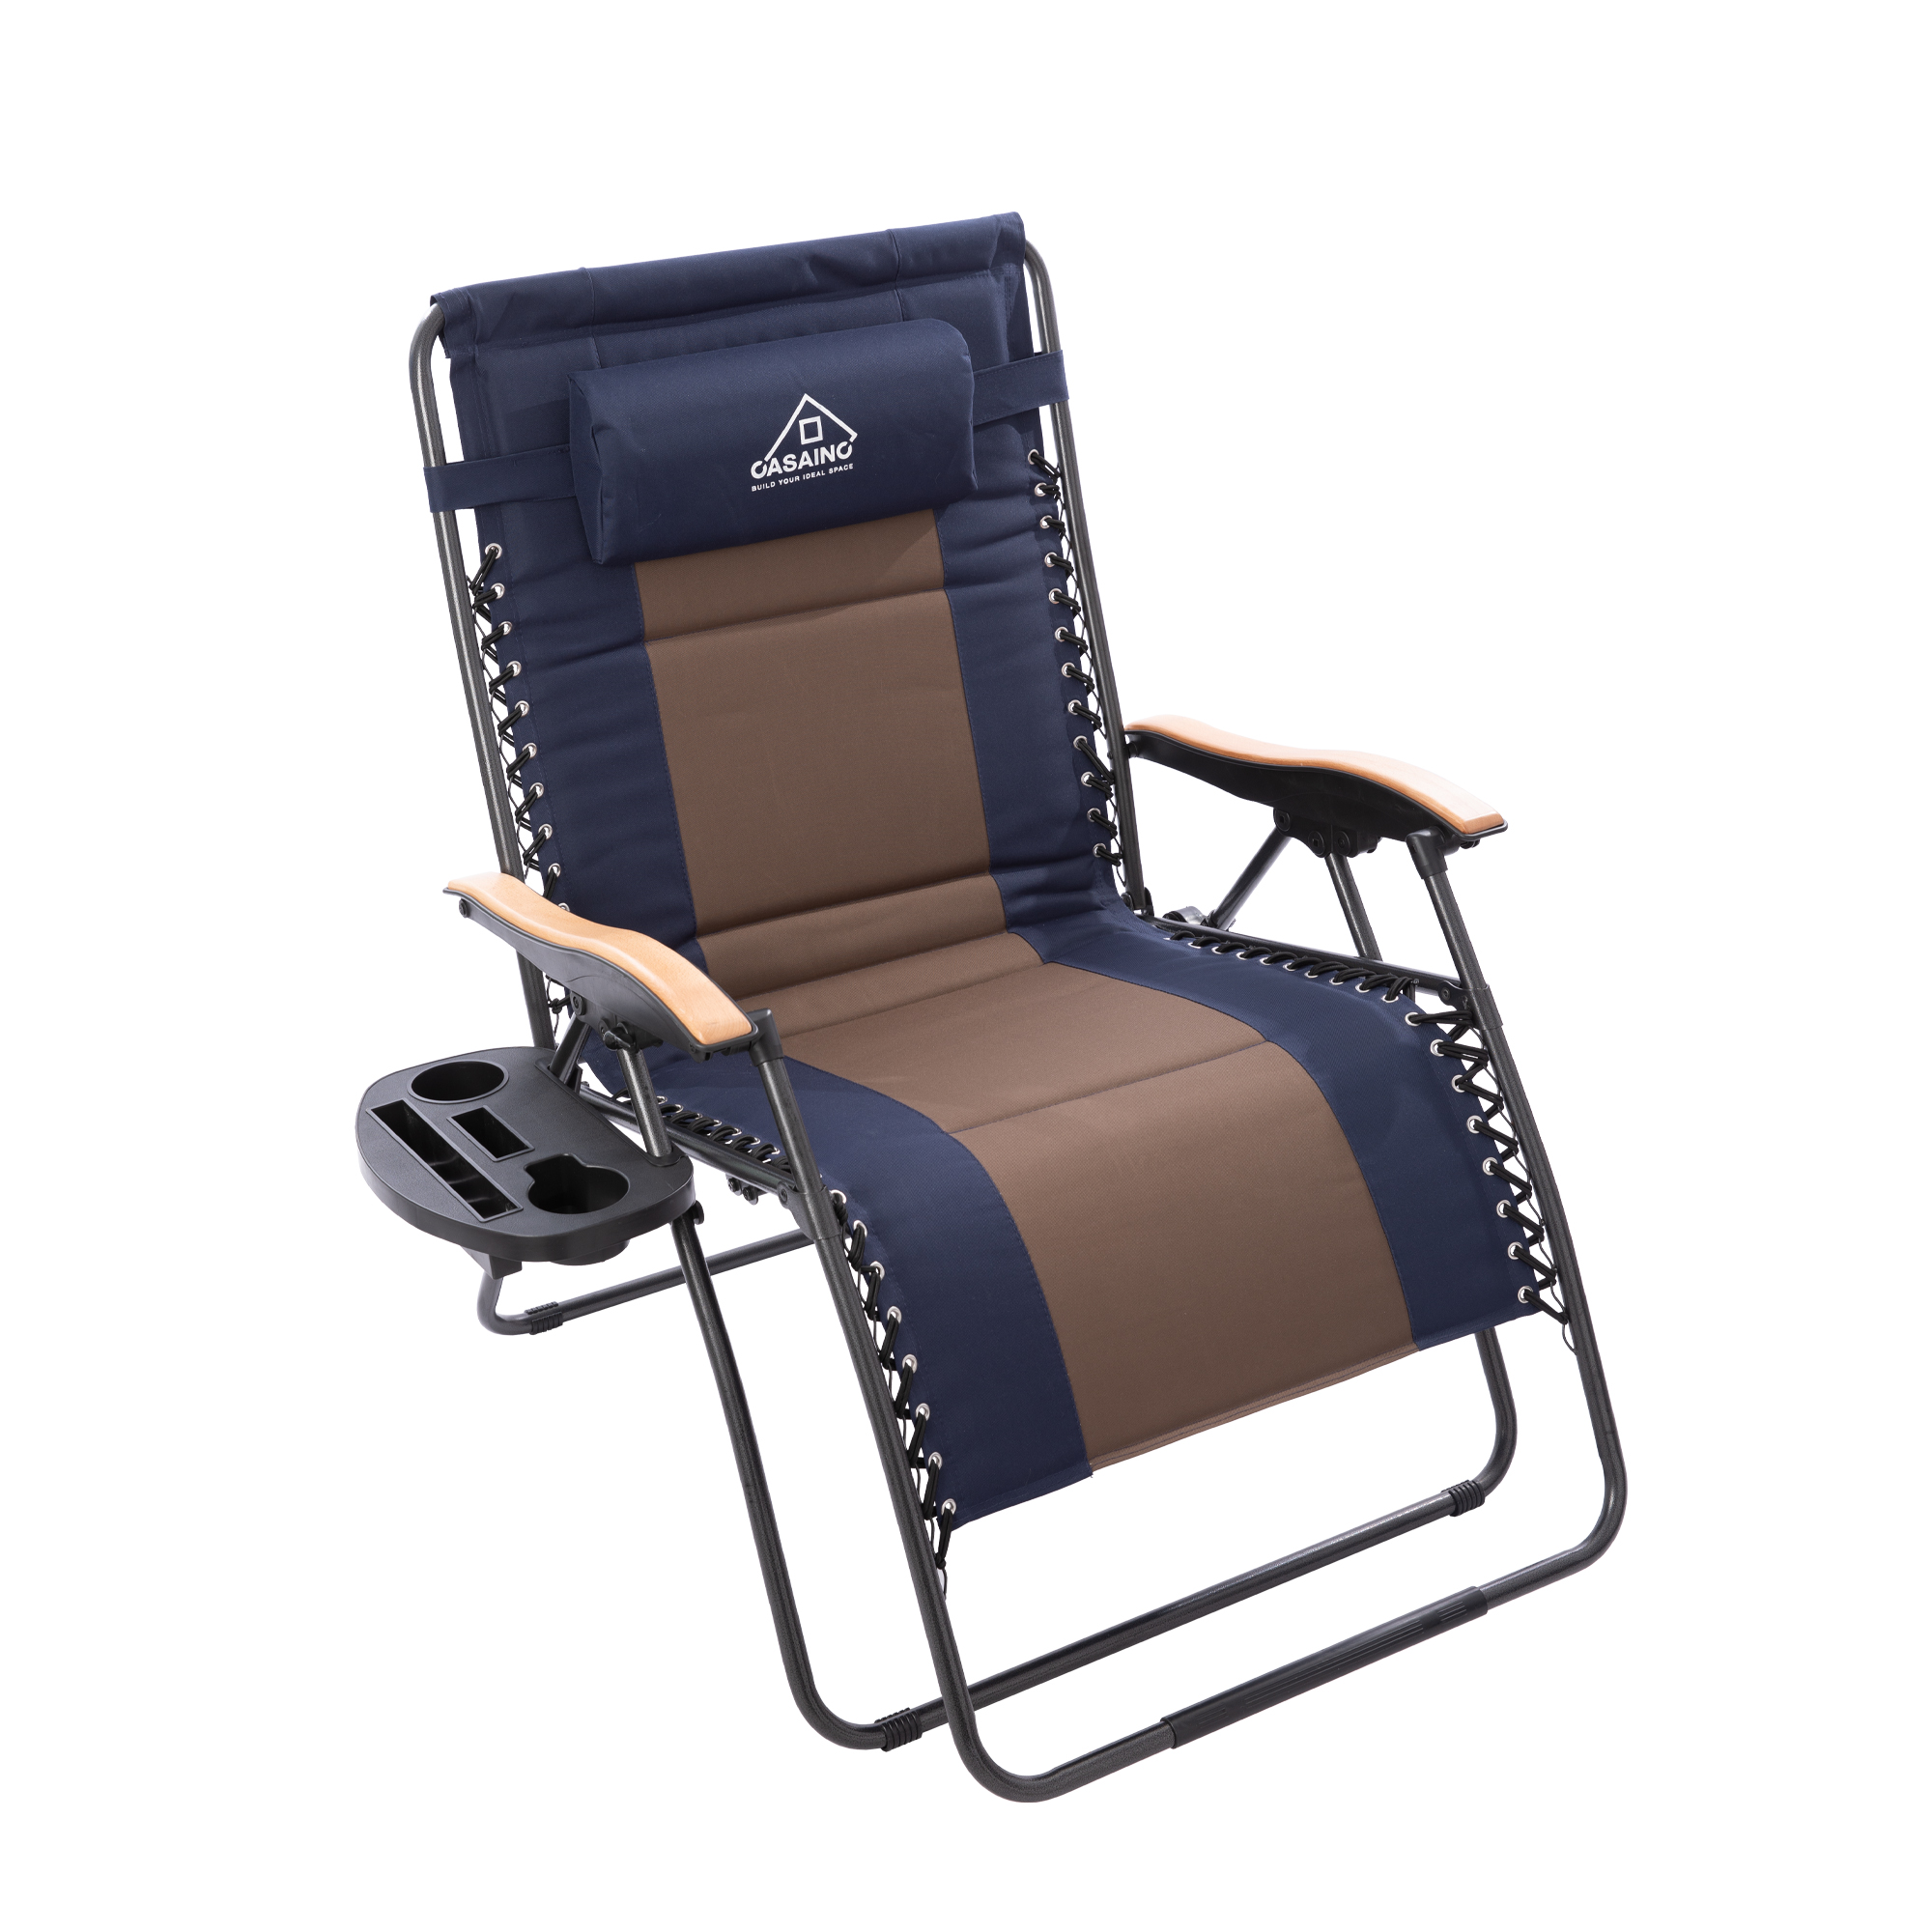 Casainc Oversized Zero Gravity Chair Wood Armrest Padded XXL Folding Patio Lounge Adjustable Recliner with Cup Holder & Side Table, 400lbs Weight Capacity, Blue&Brown-CASAINC